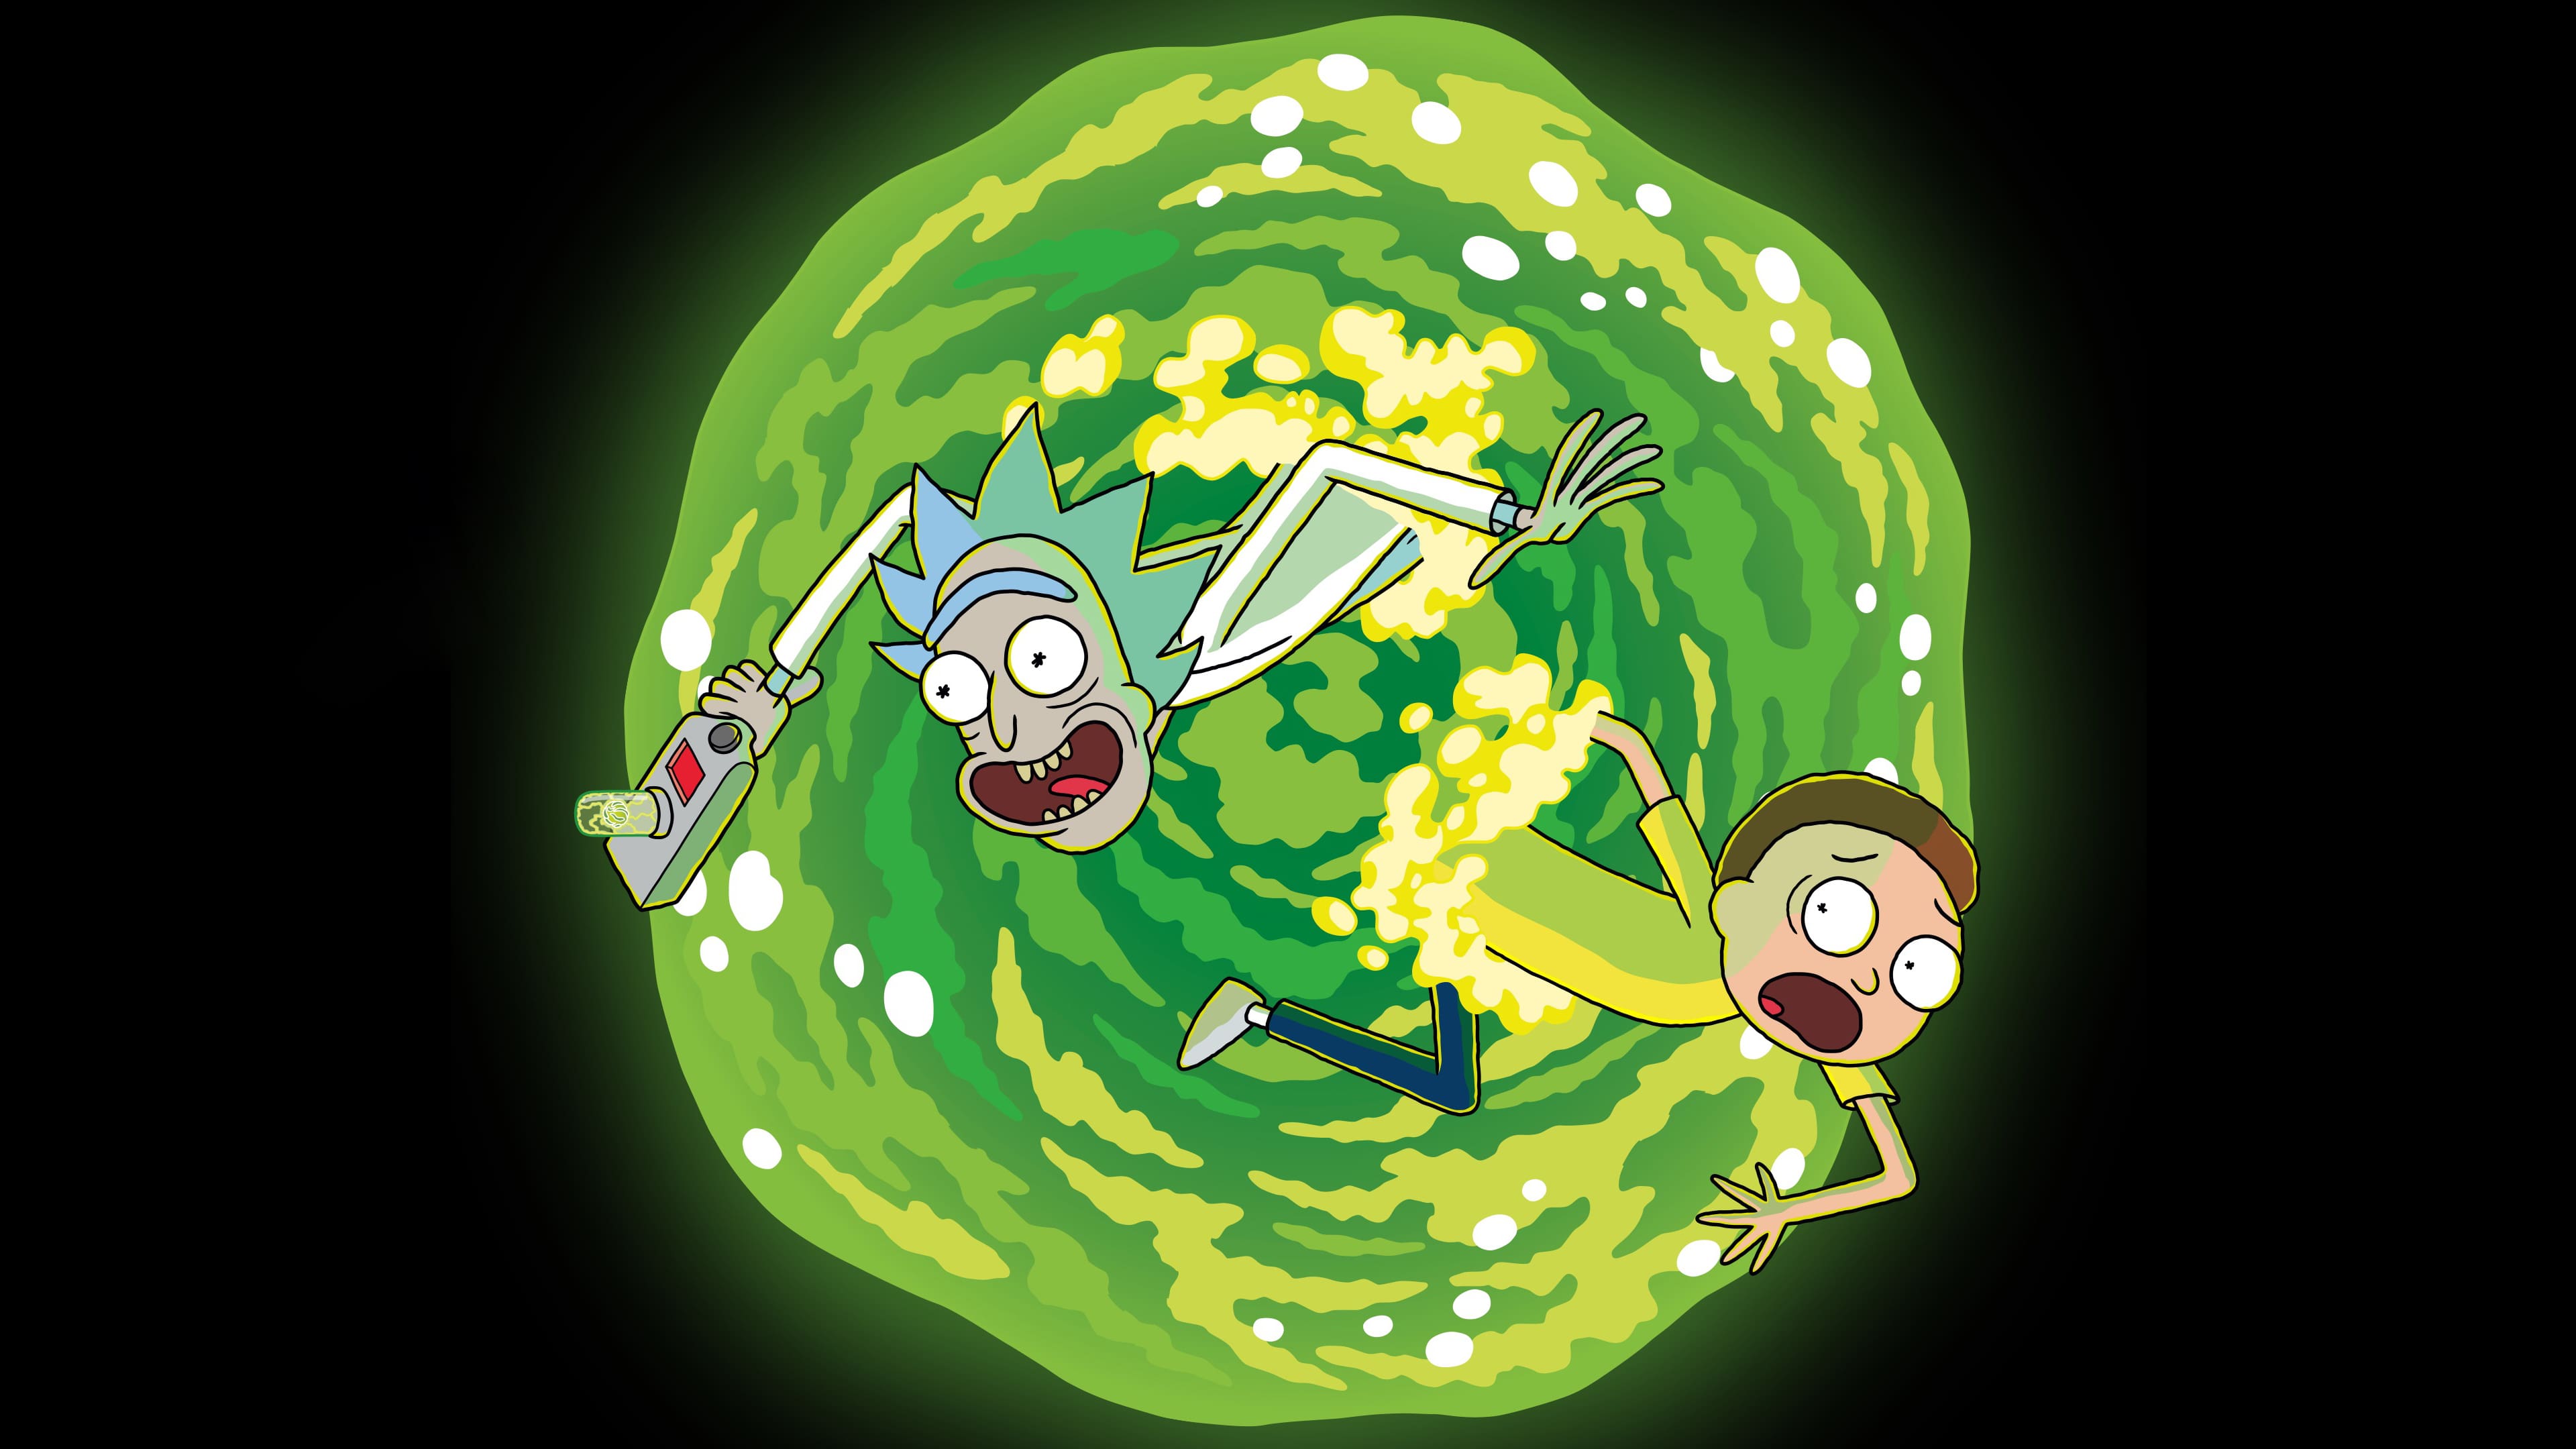 rick and morty, tv show, morty smith, rick sanchez mobile wallpaper